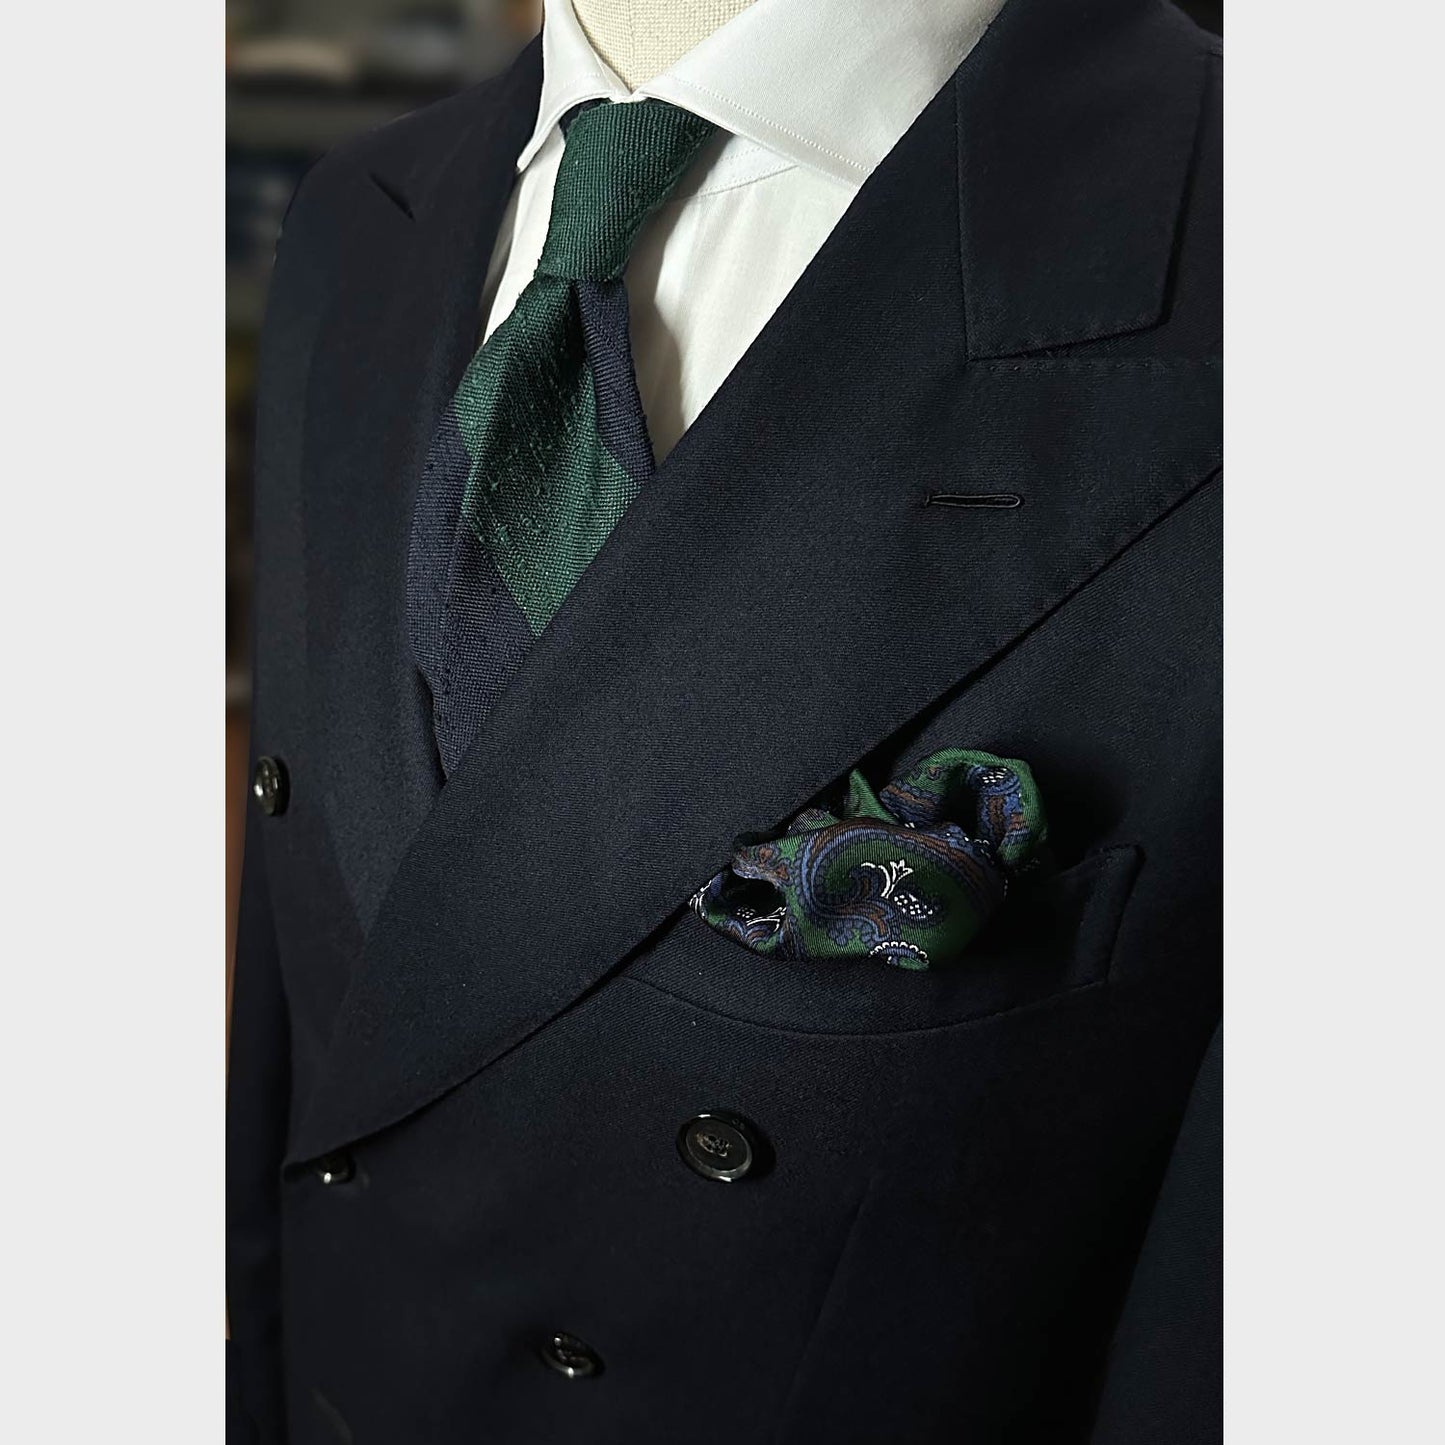 Formal shantung tie with wide striped navy blue and pine green, ideal for refined outfits four seasons, handmade in Italy by F.Marino exclusive for Wools Boutique Uomo, unlined tie 3 folds with hand rolled edge.